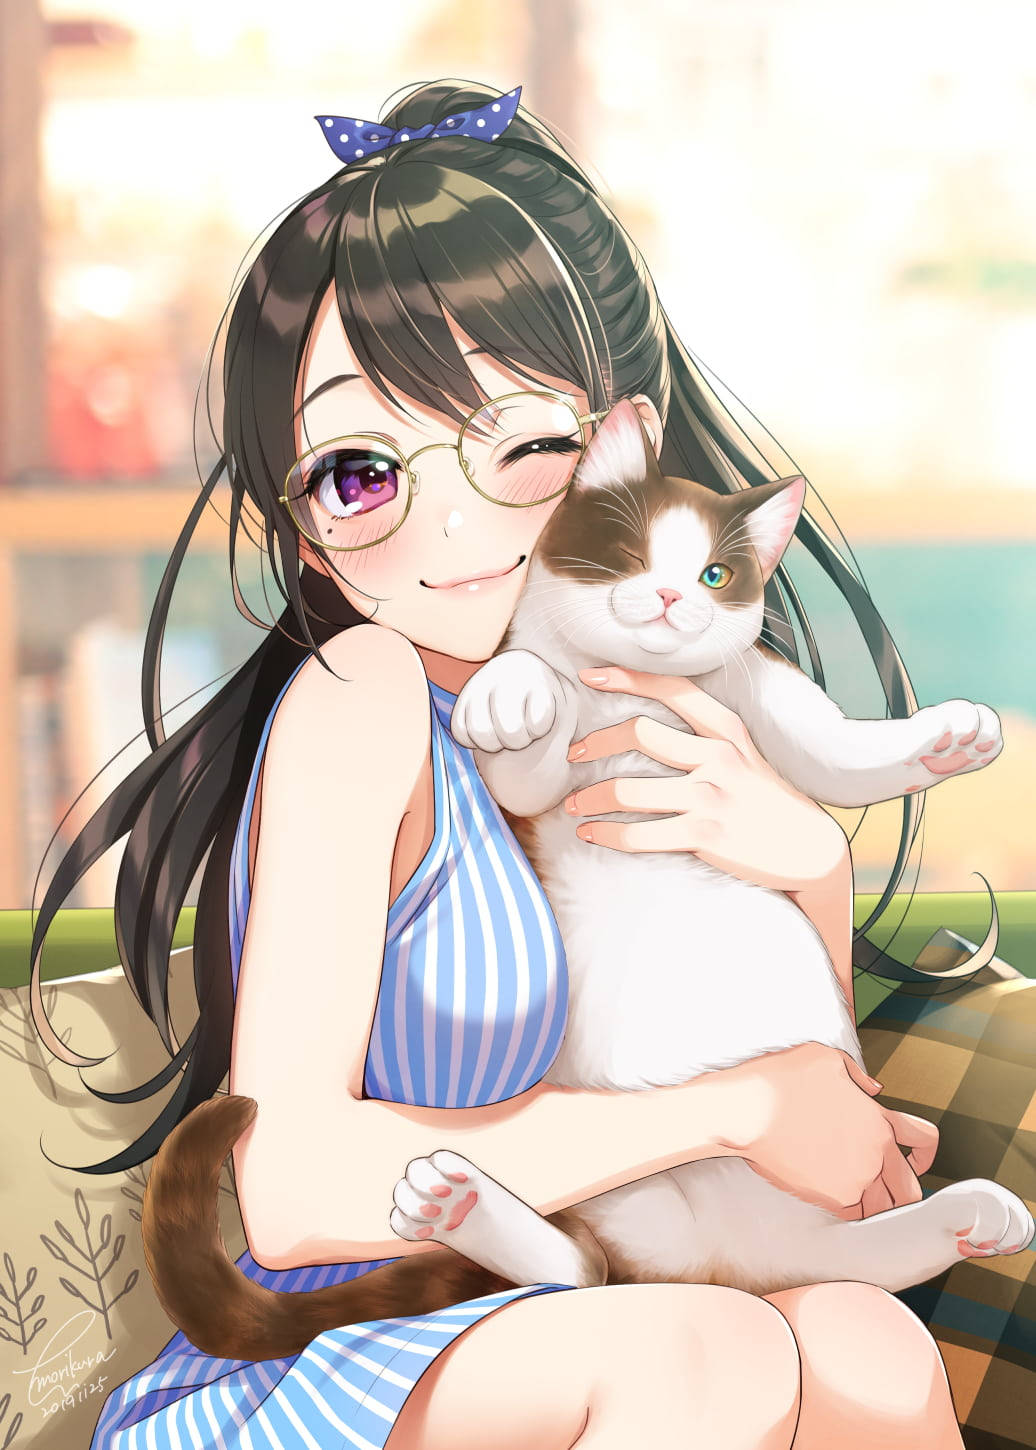 Aesthetic Anime Girl With Cat Background